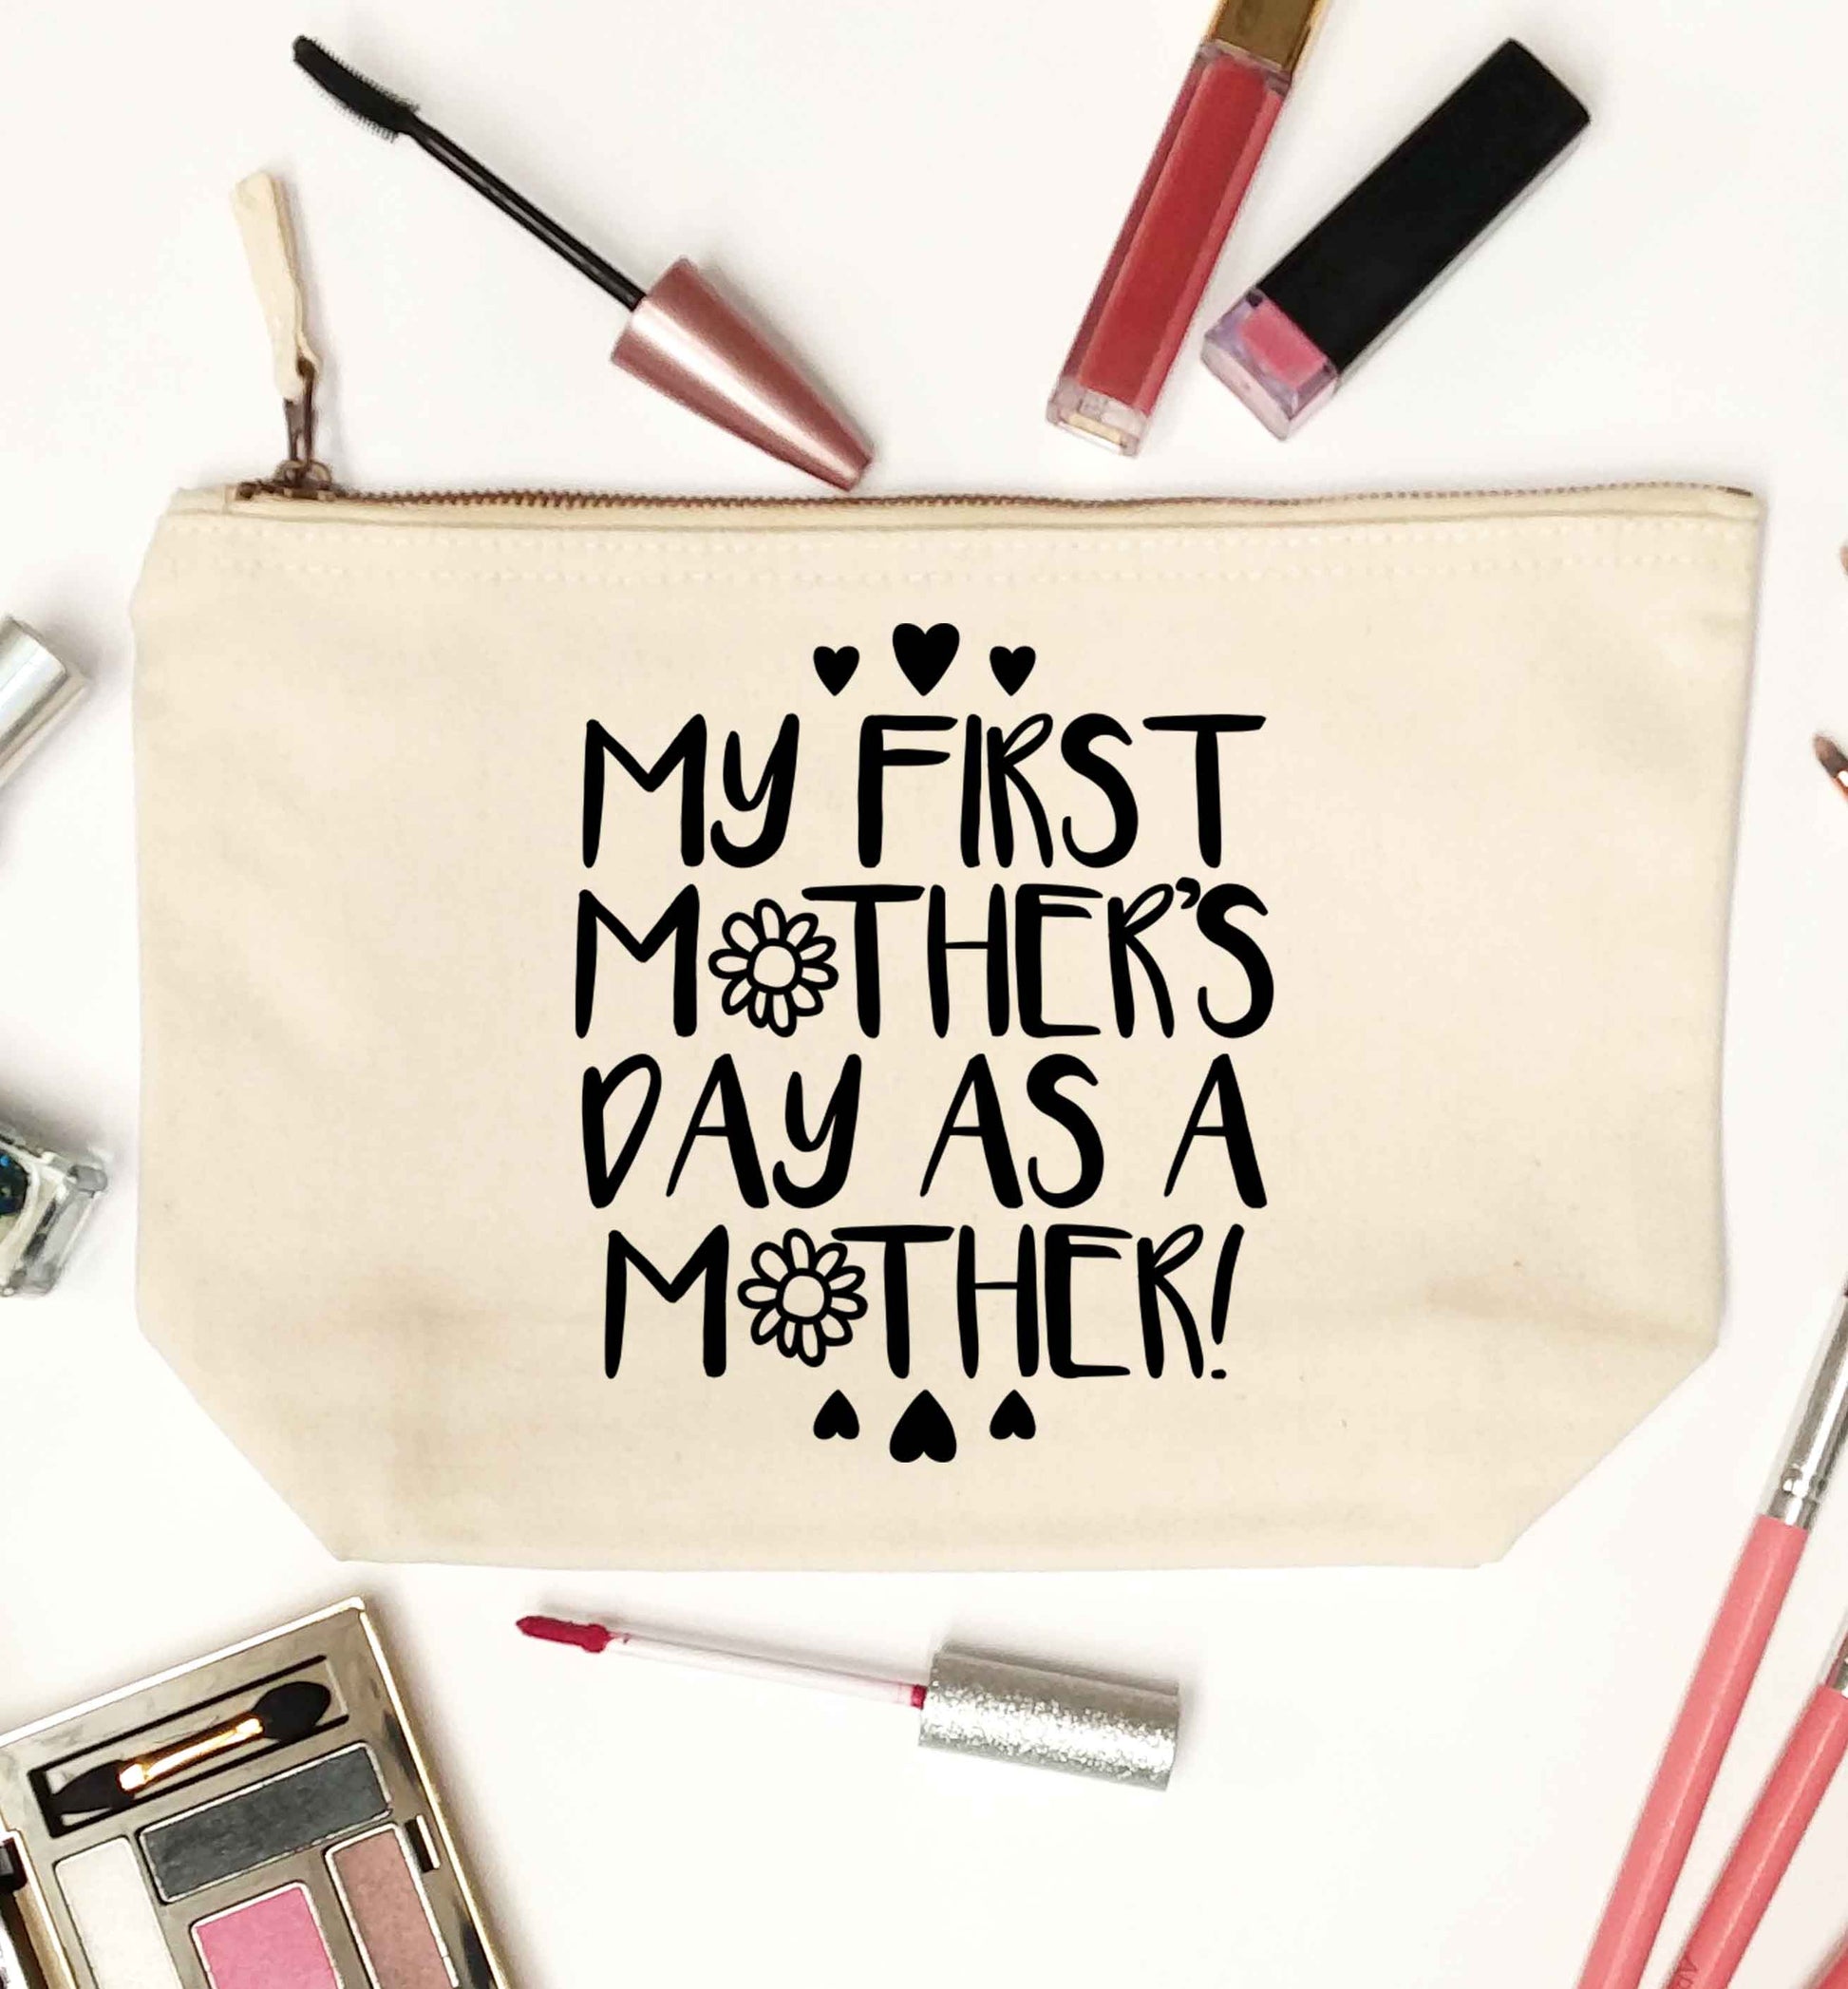 It's my first mother's day as a mother natural makeup bag